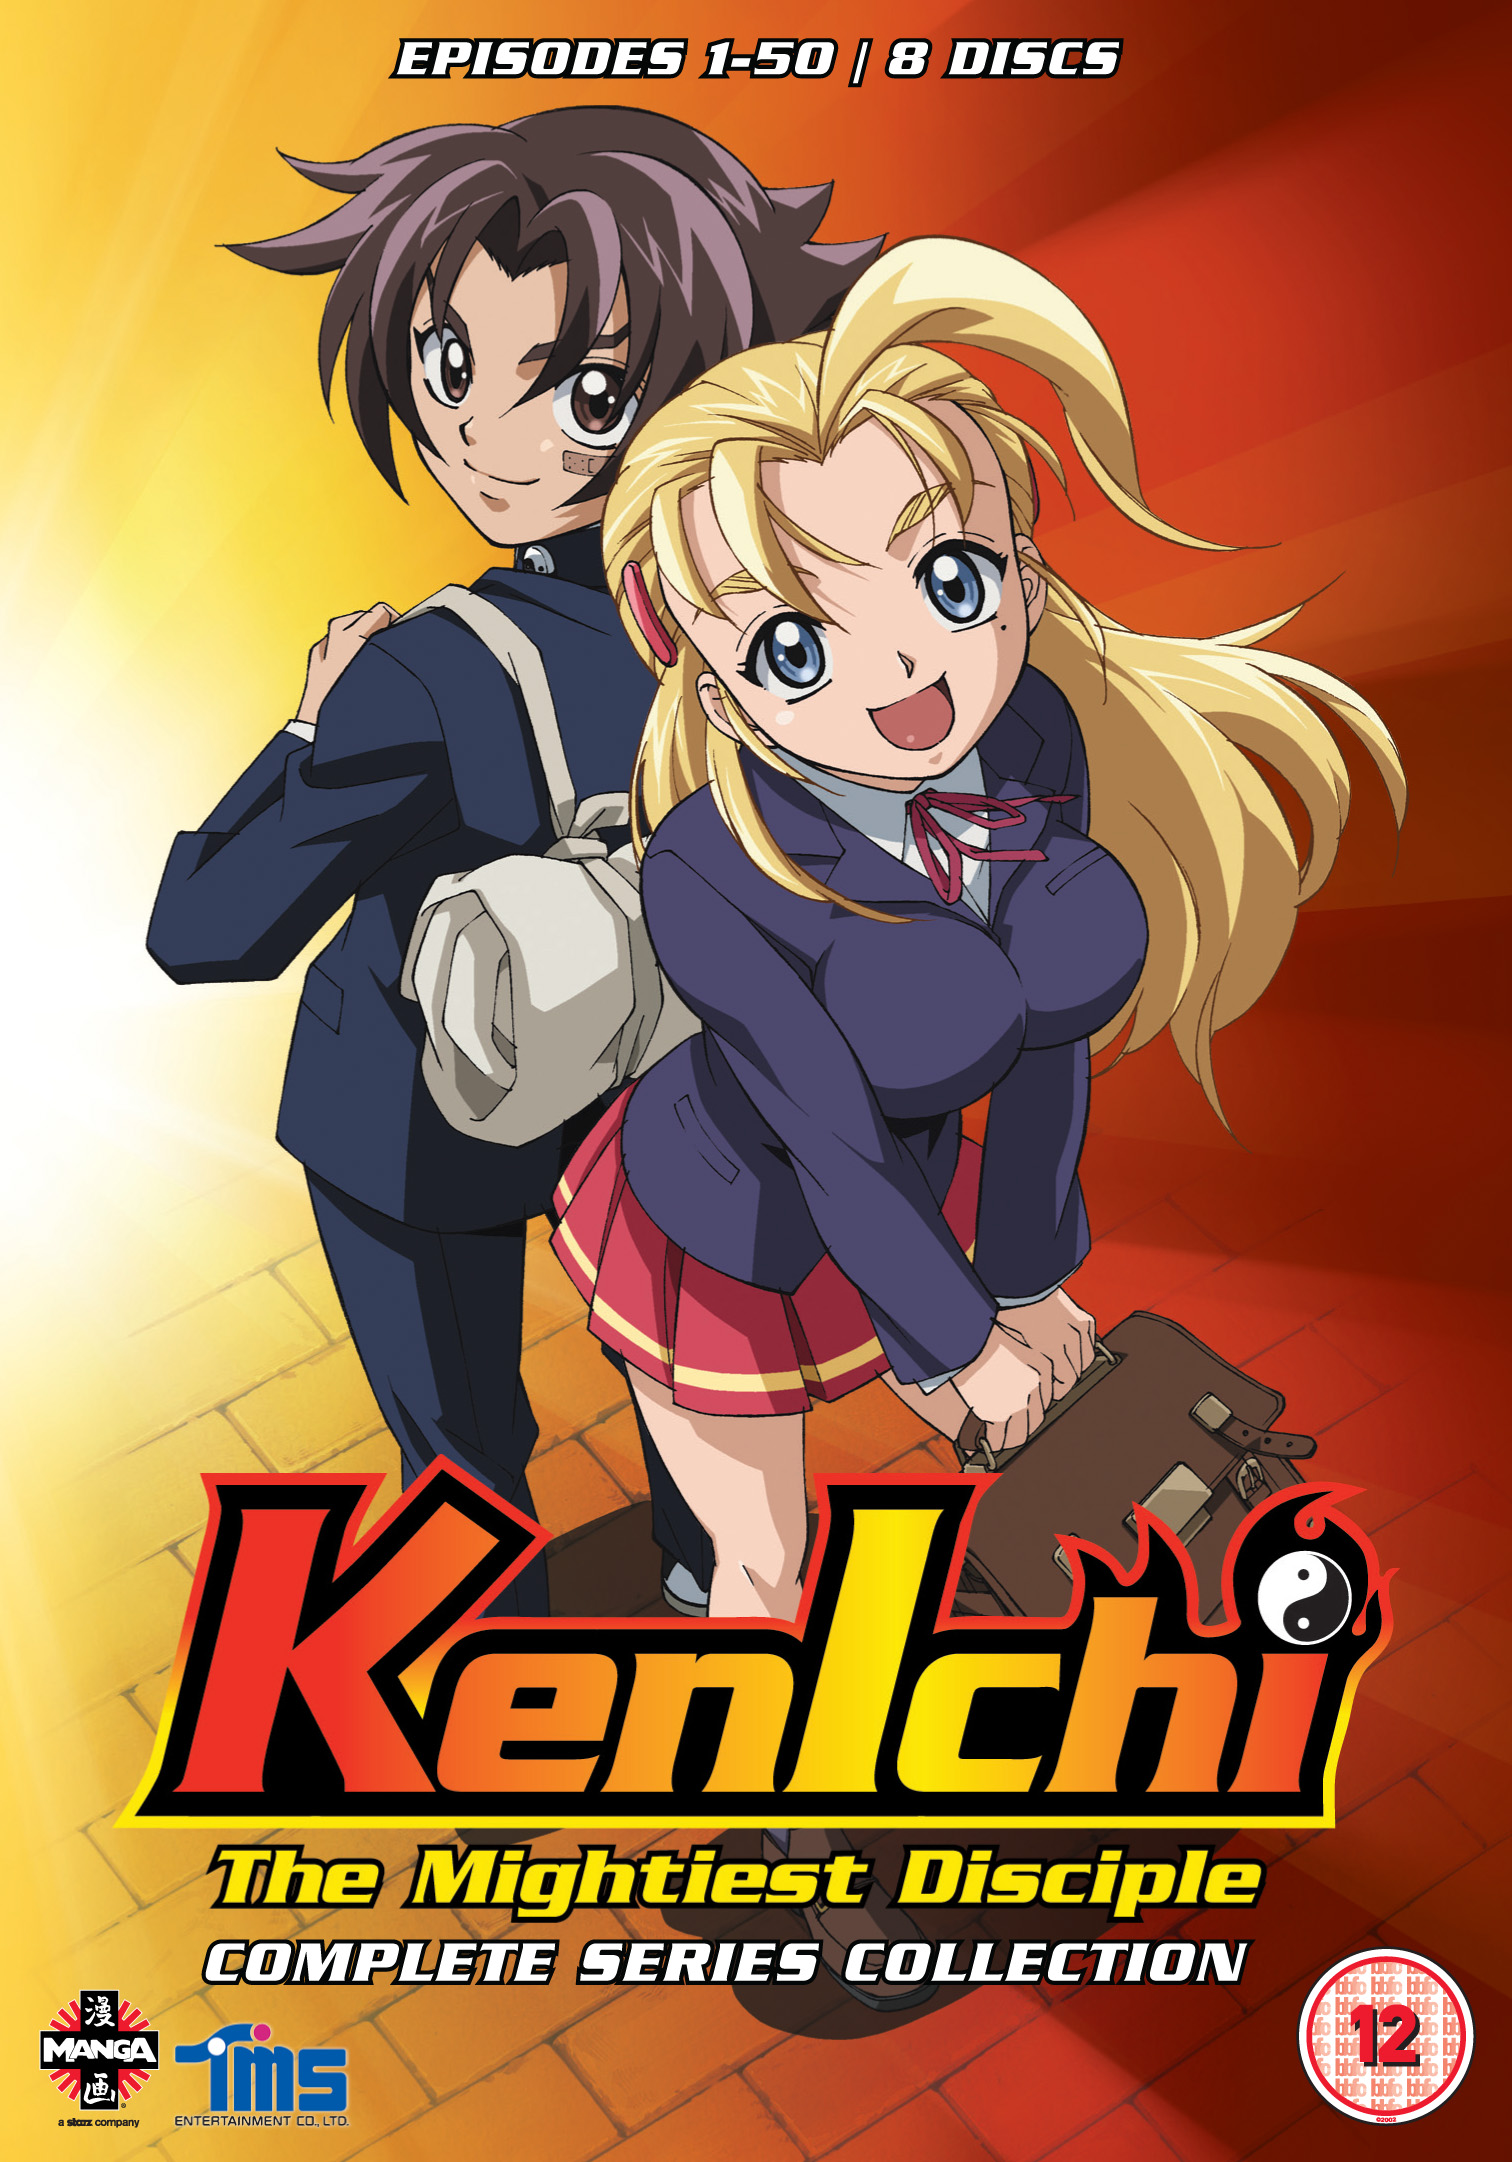 kenichi disciple mightiest complete episodes dvd series fetch previous